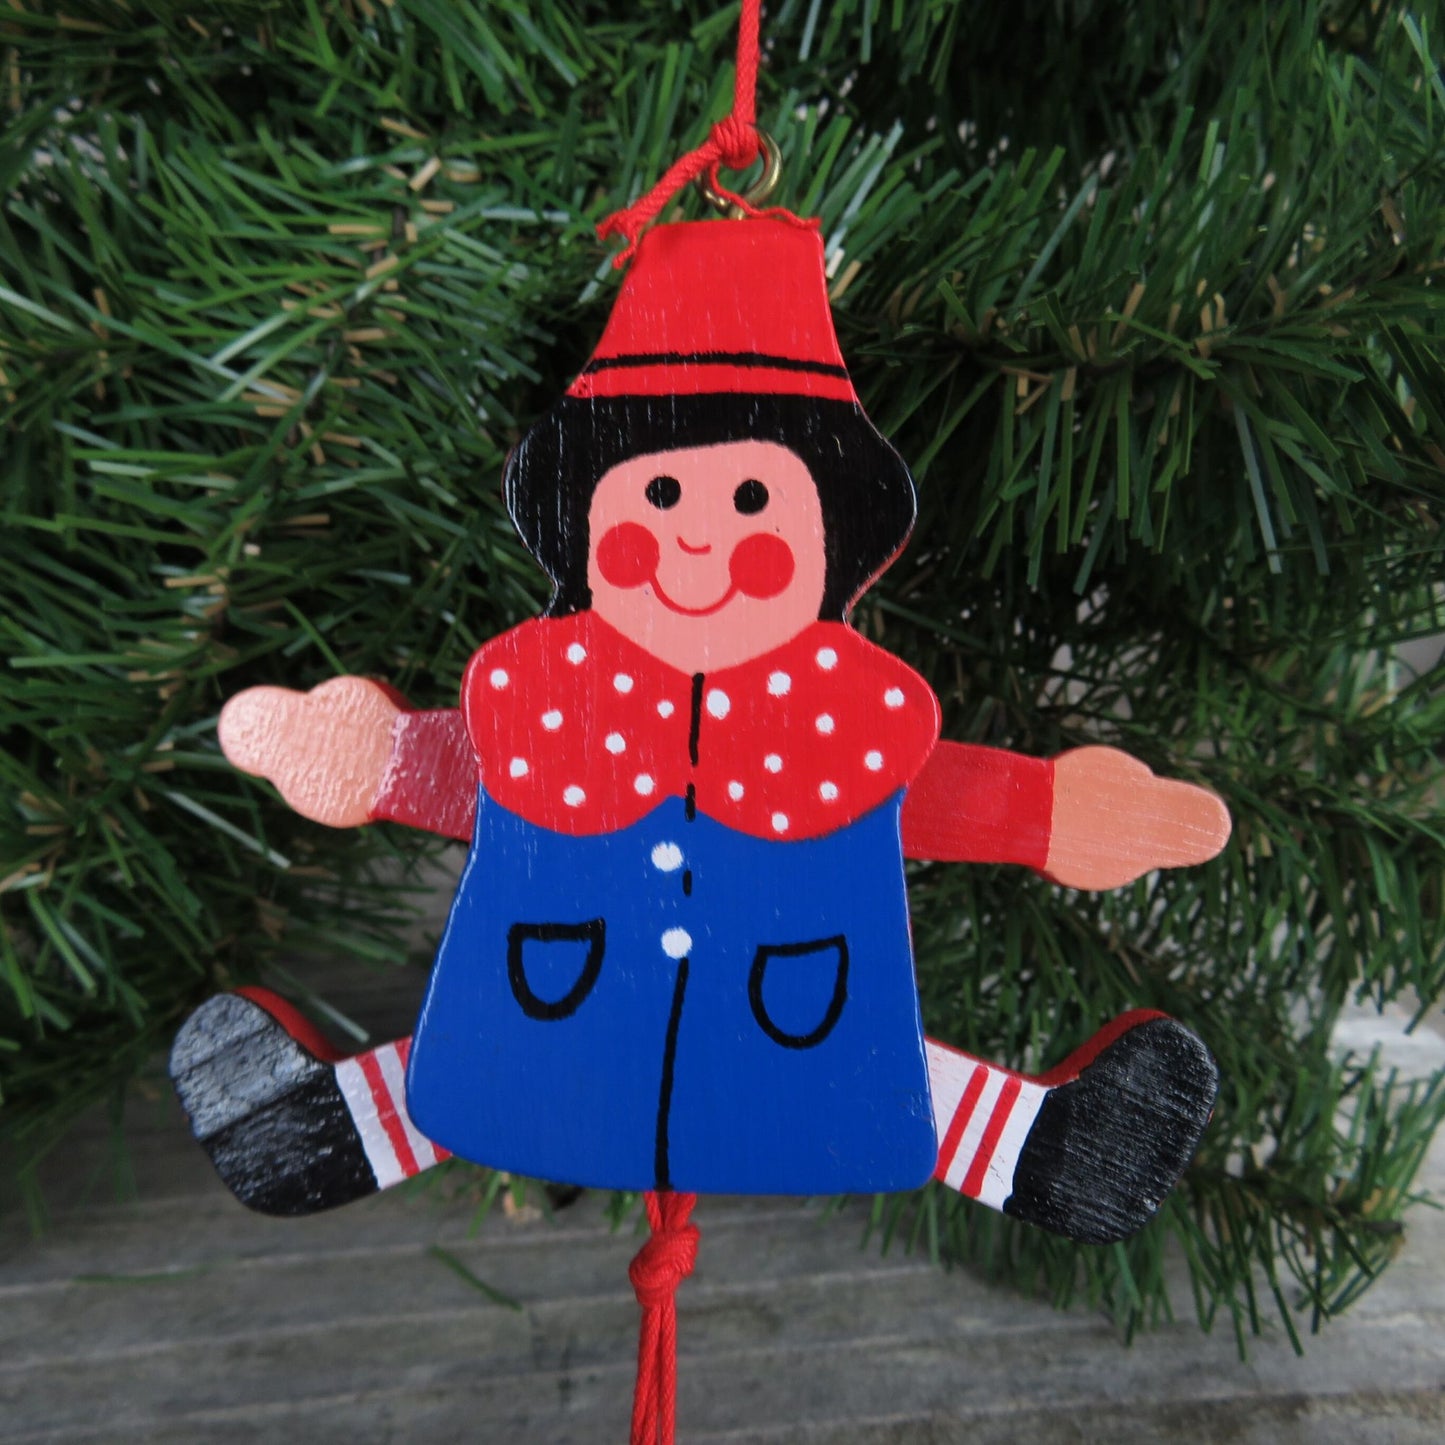 Red and Blue Boy Pull String Wood Ornament Vintage Wooden Jumping Toy Christmas Ornament